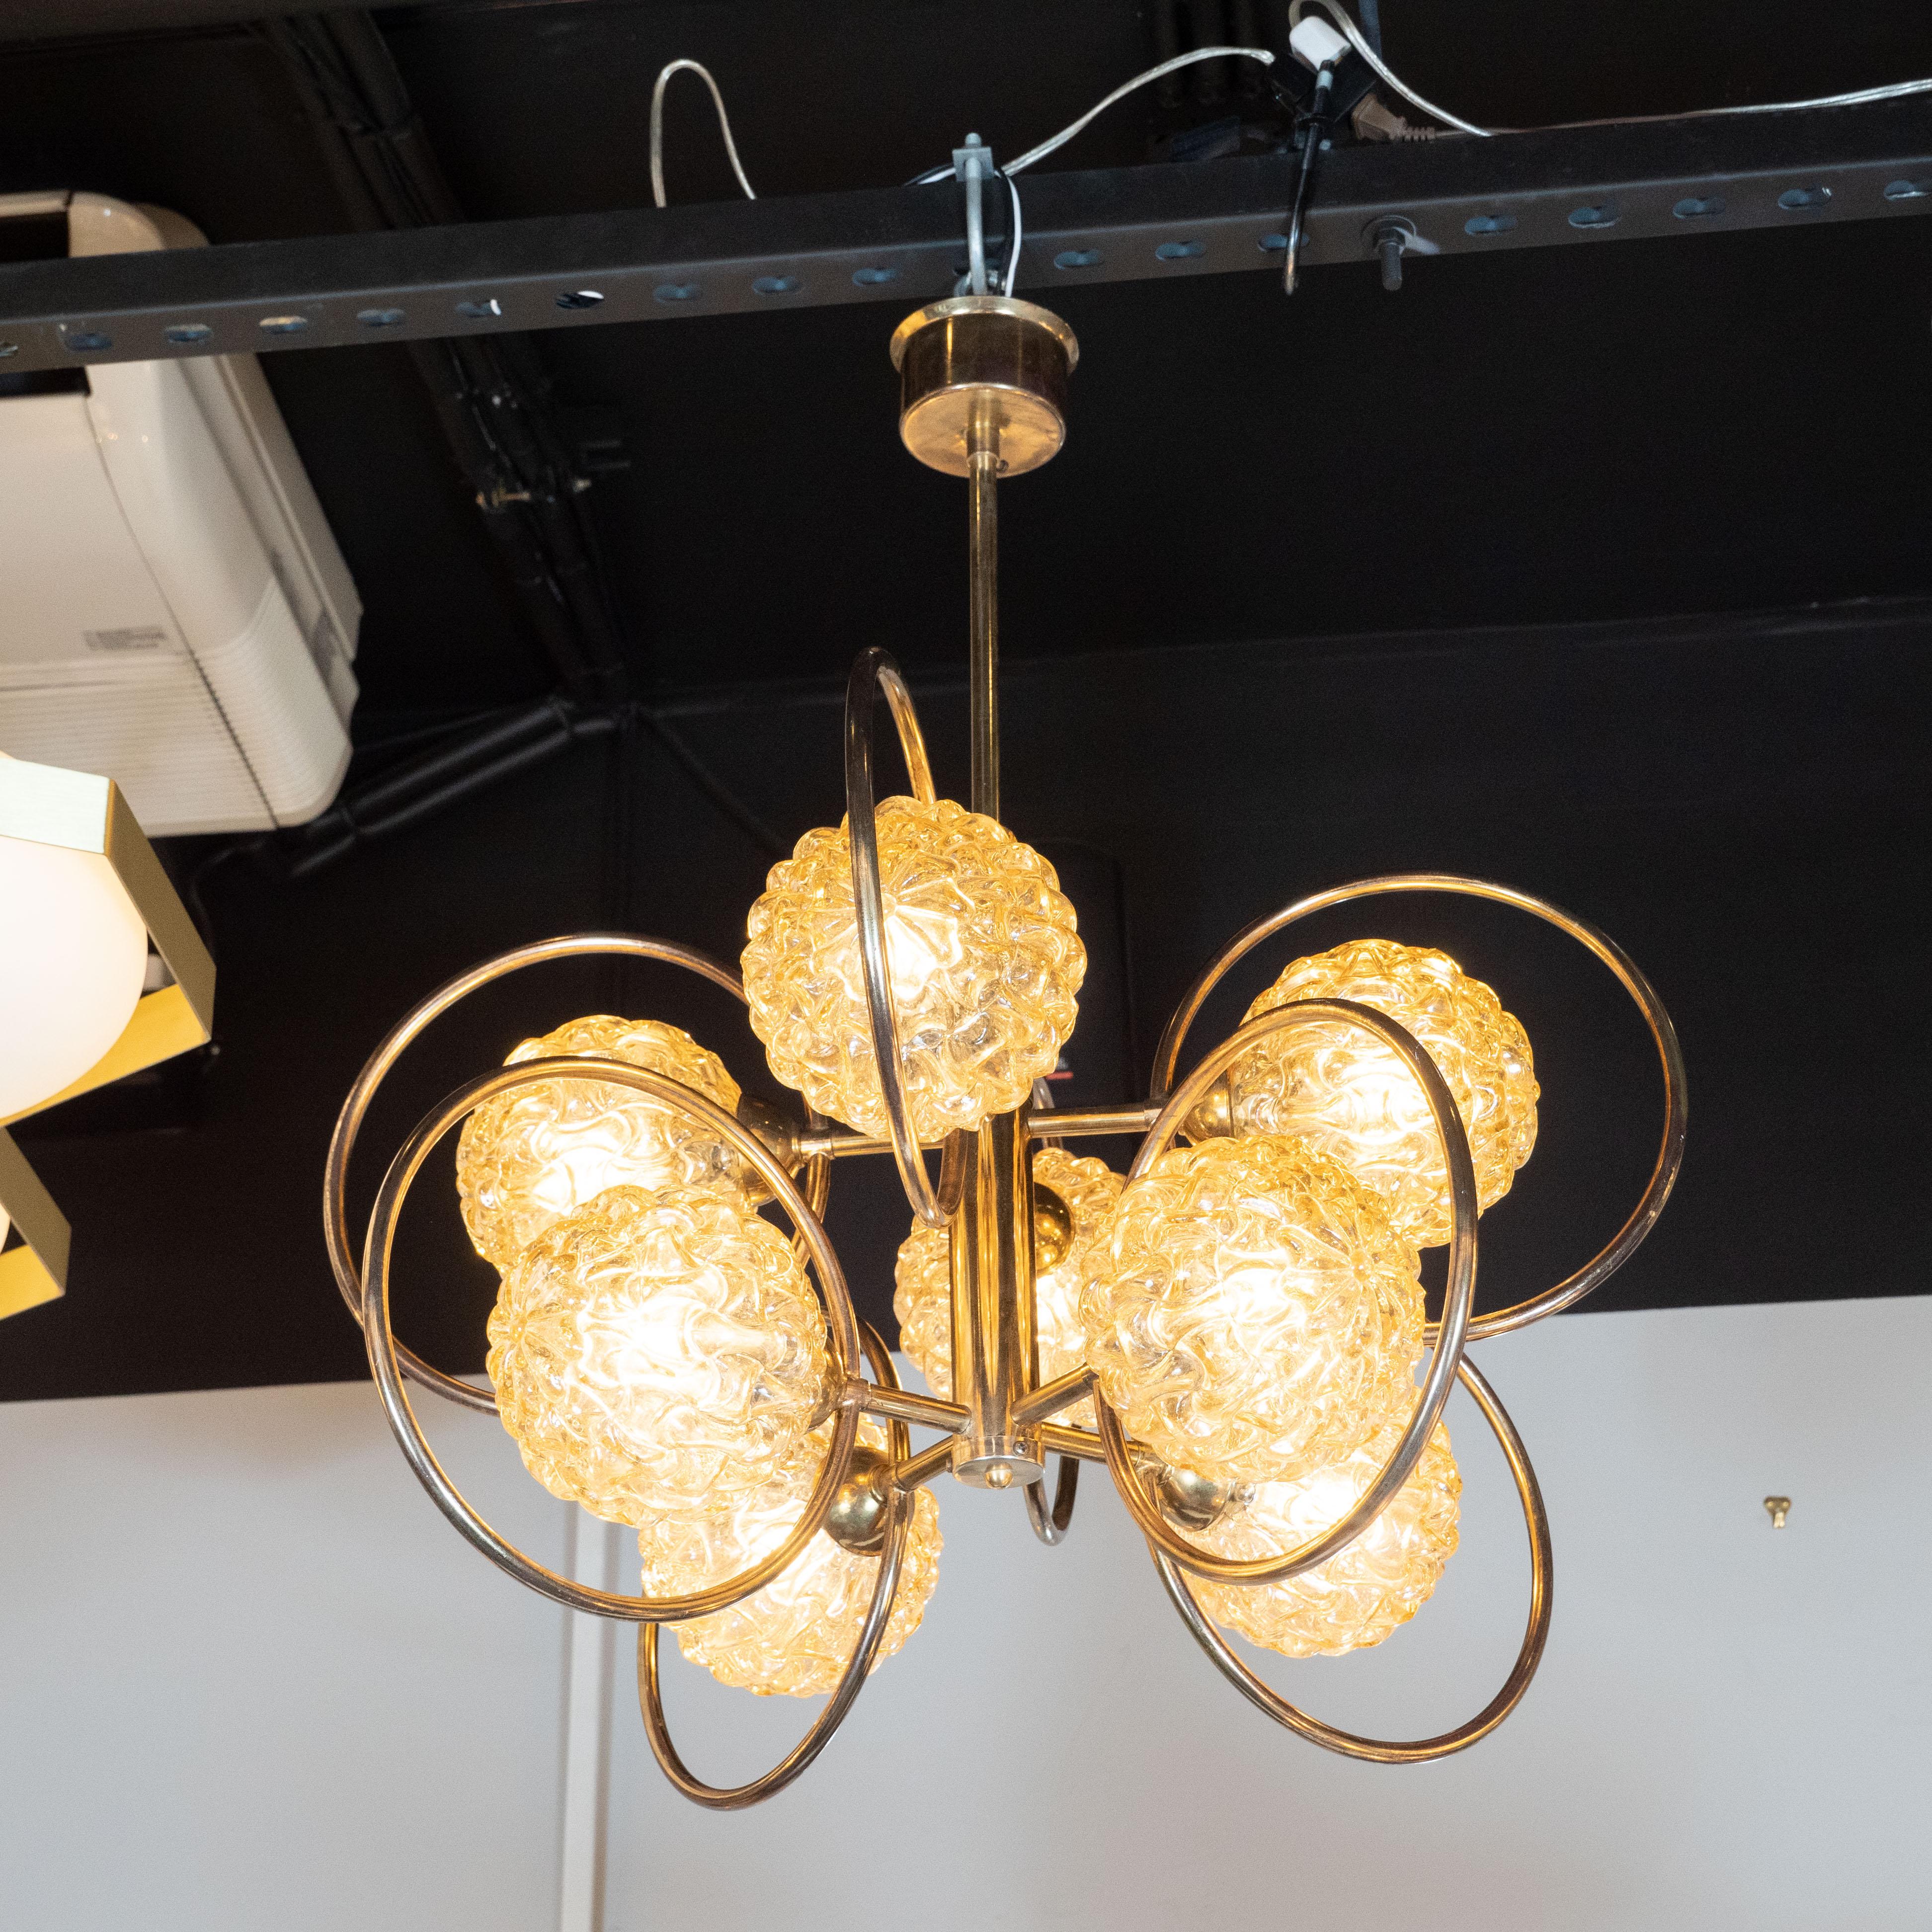 This Mid-Century Modern patinated brass chandelier was designed and produced in Italy, circa 1970. The fixture is suspended from a brass rod that connects to a central brass cylinder. Eight rods connect perpendicularly to this central cylinder, each